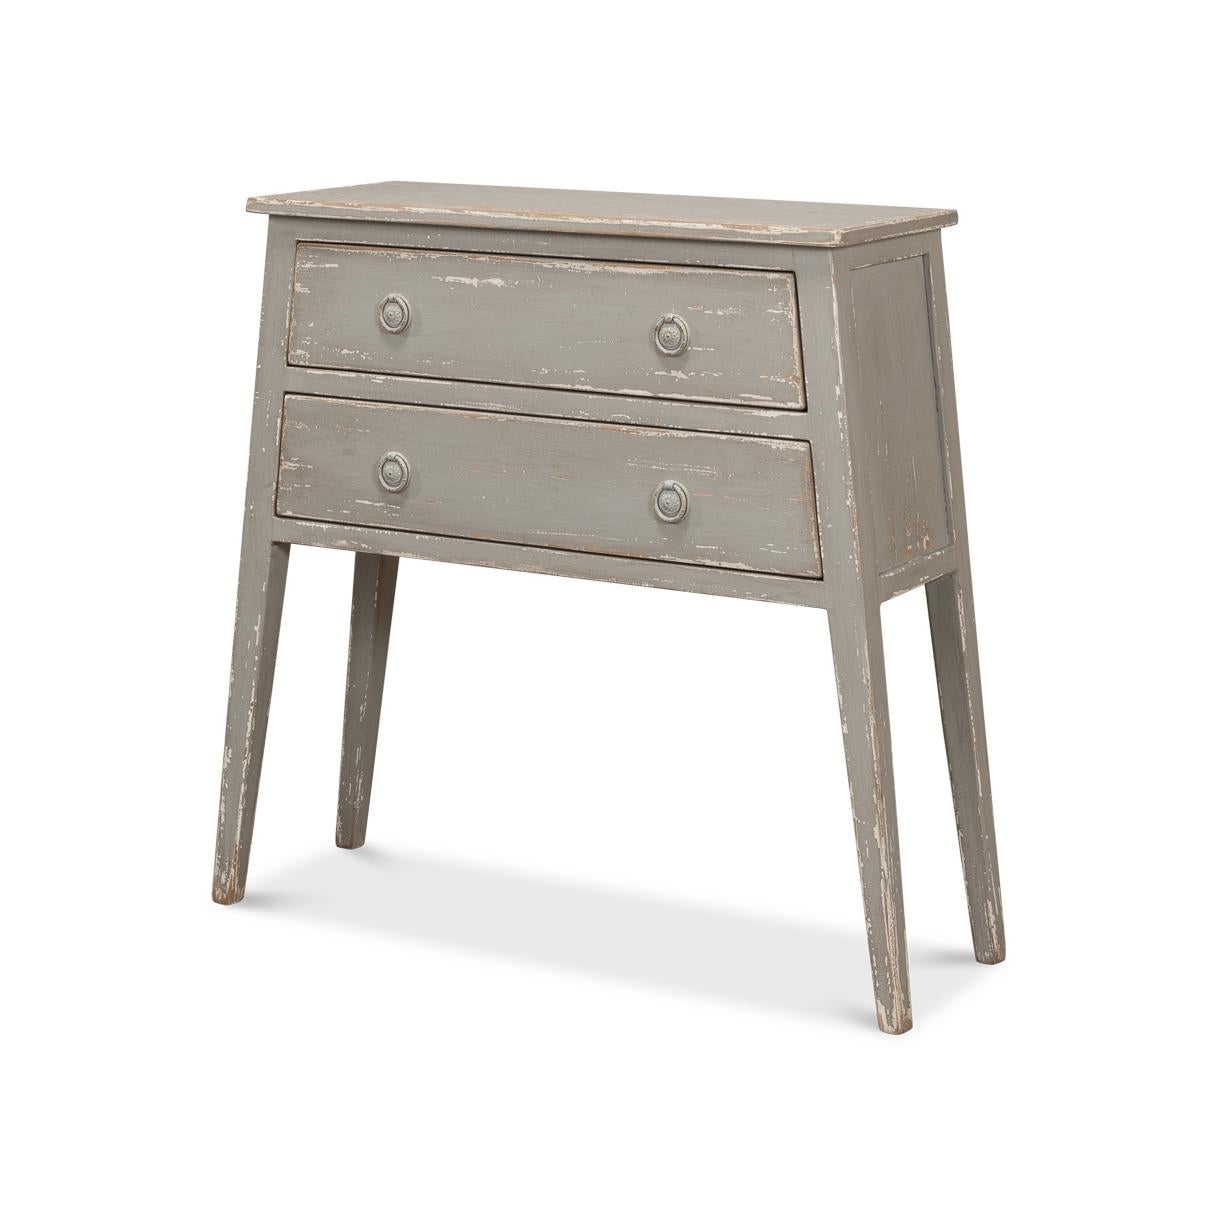 A delightful nod to yesteryear's aesthetics, crafted for the modern home. This piece exudes a shabby chic allure with its weathered gray finish that tells a story of timeless elegance.

Designed with a slim profile, this accent table fits seamlessly